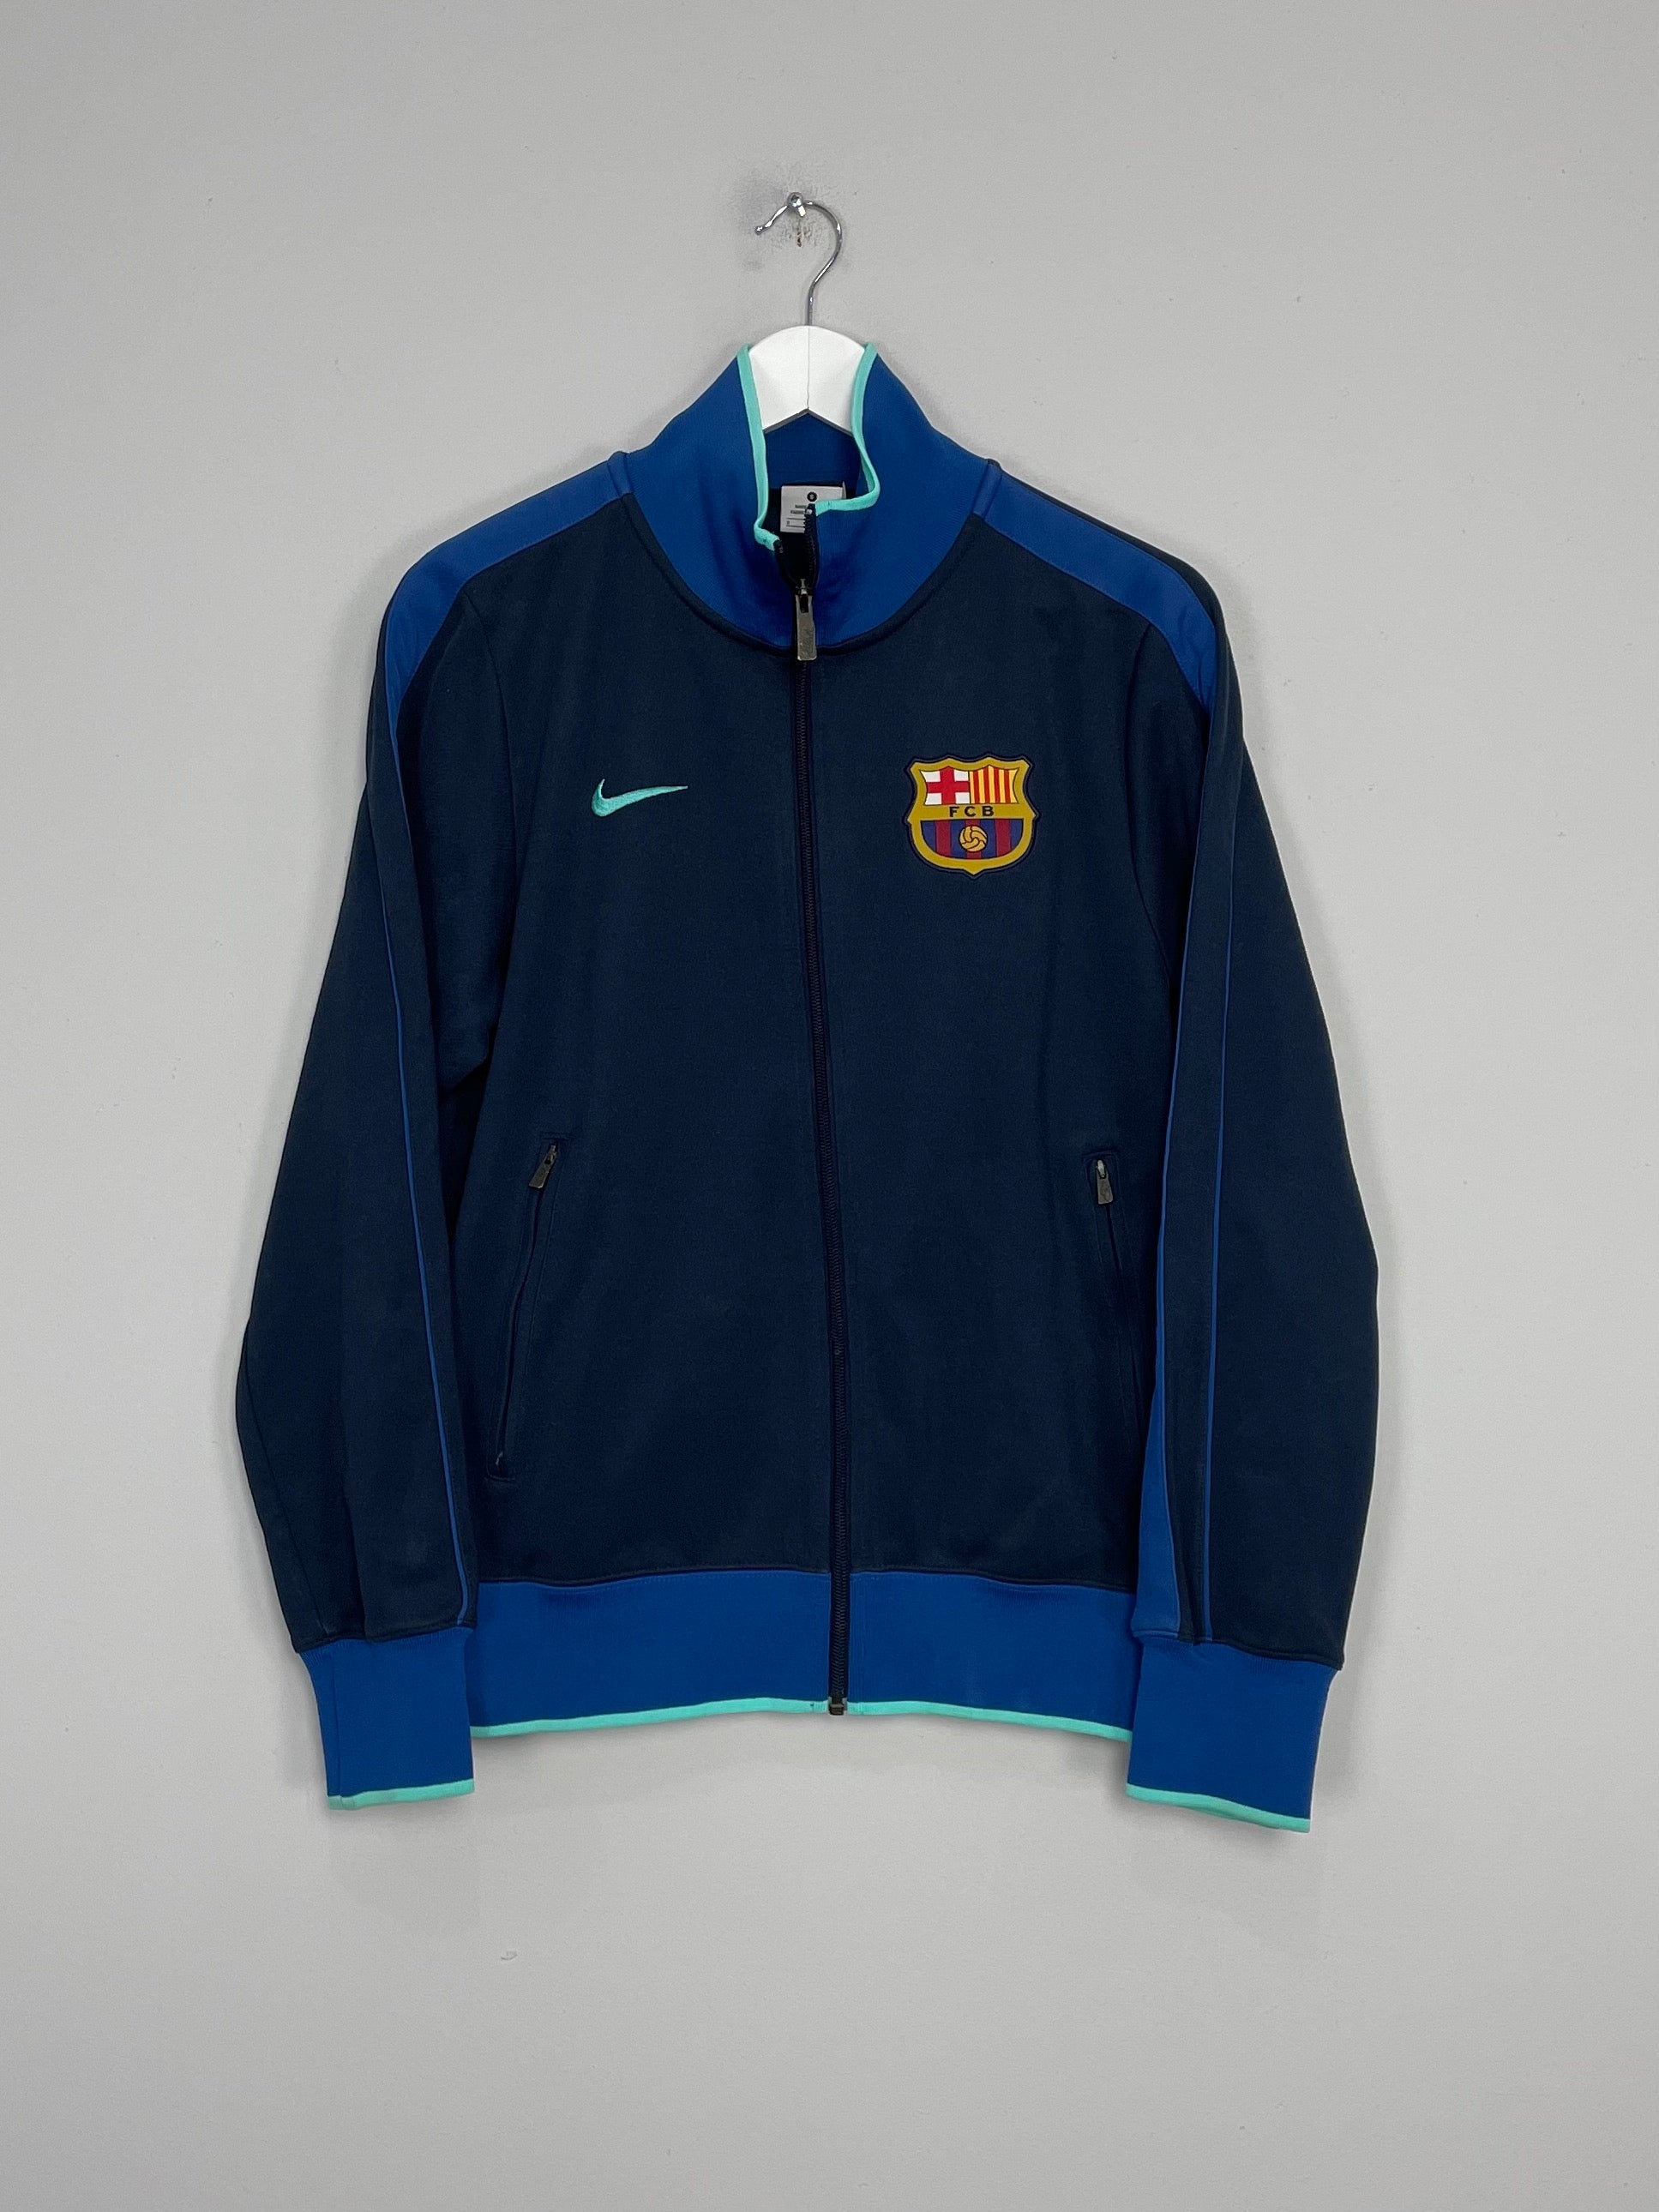 Image of the Barcelona jacket from the 2010/11 season